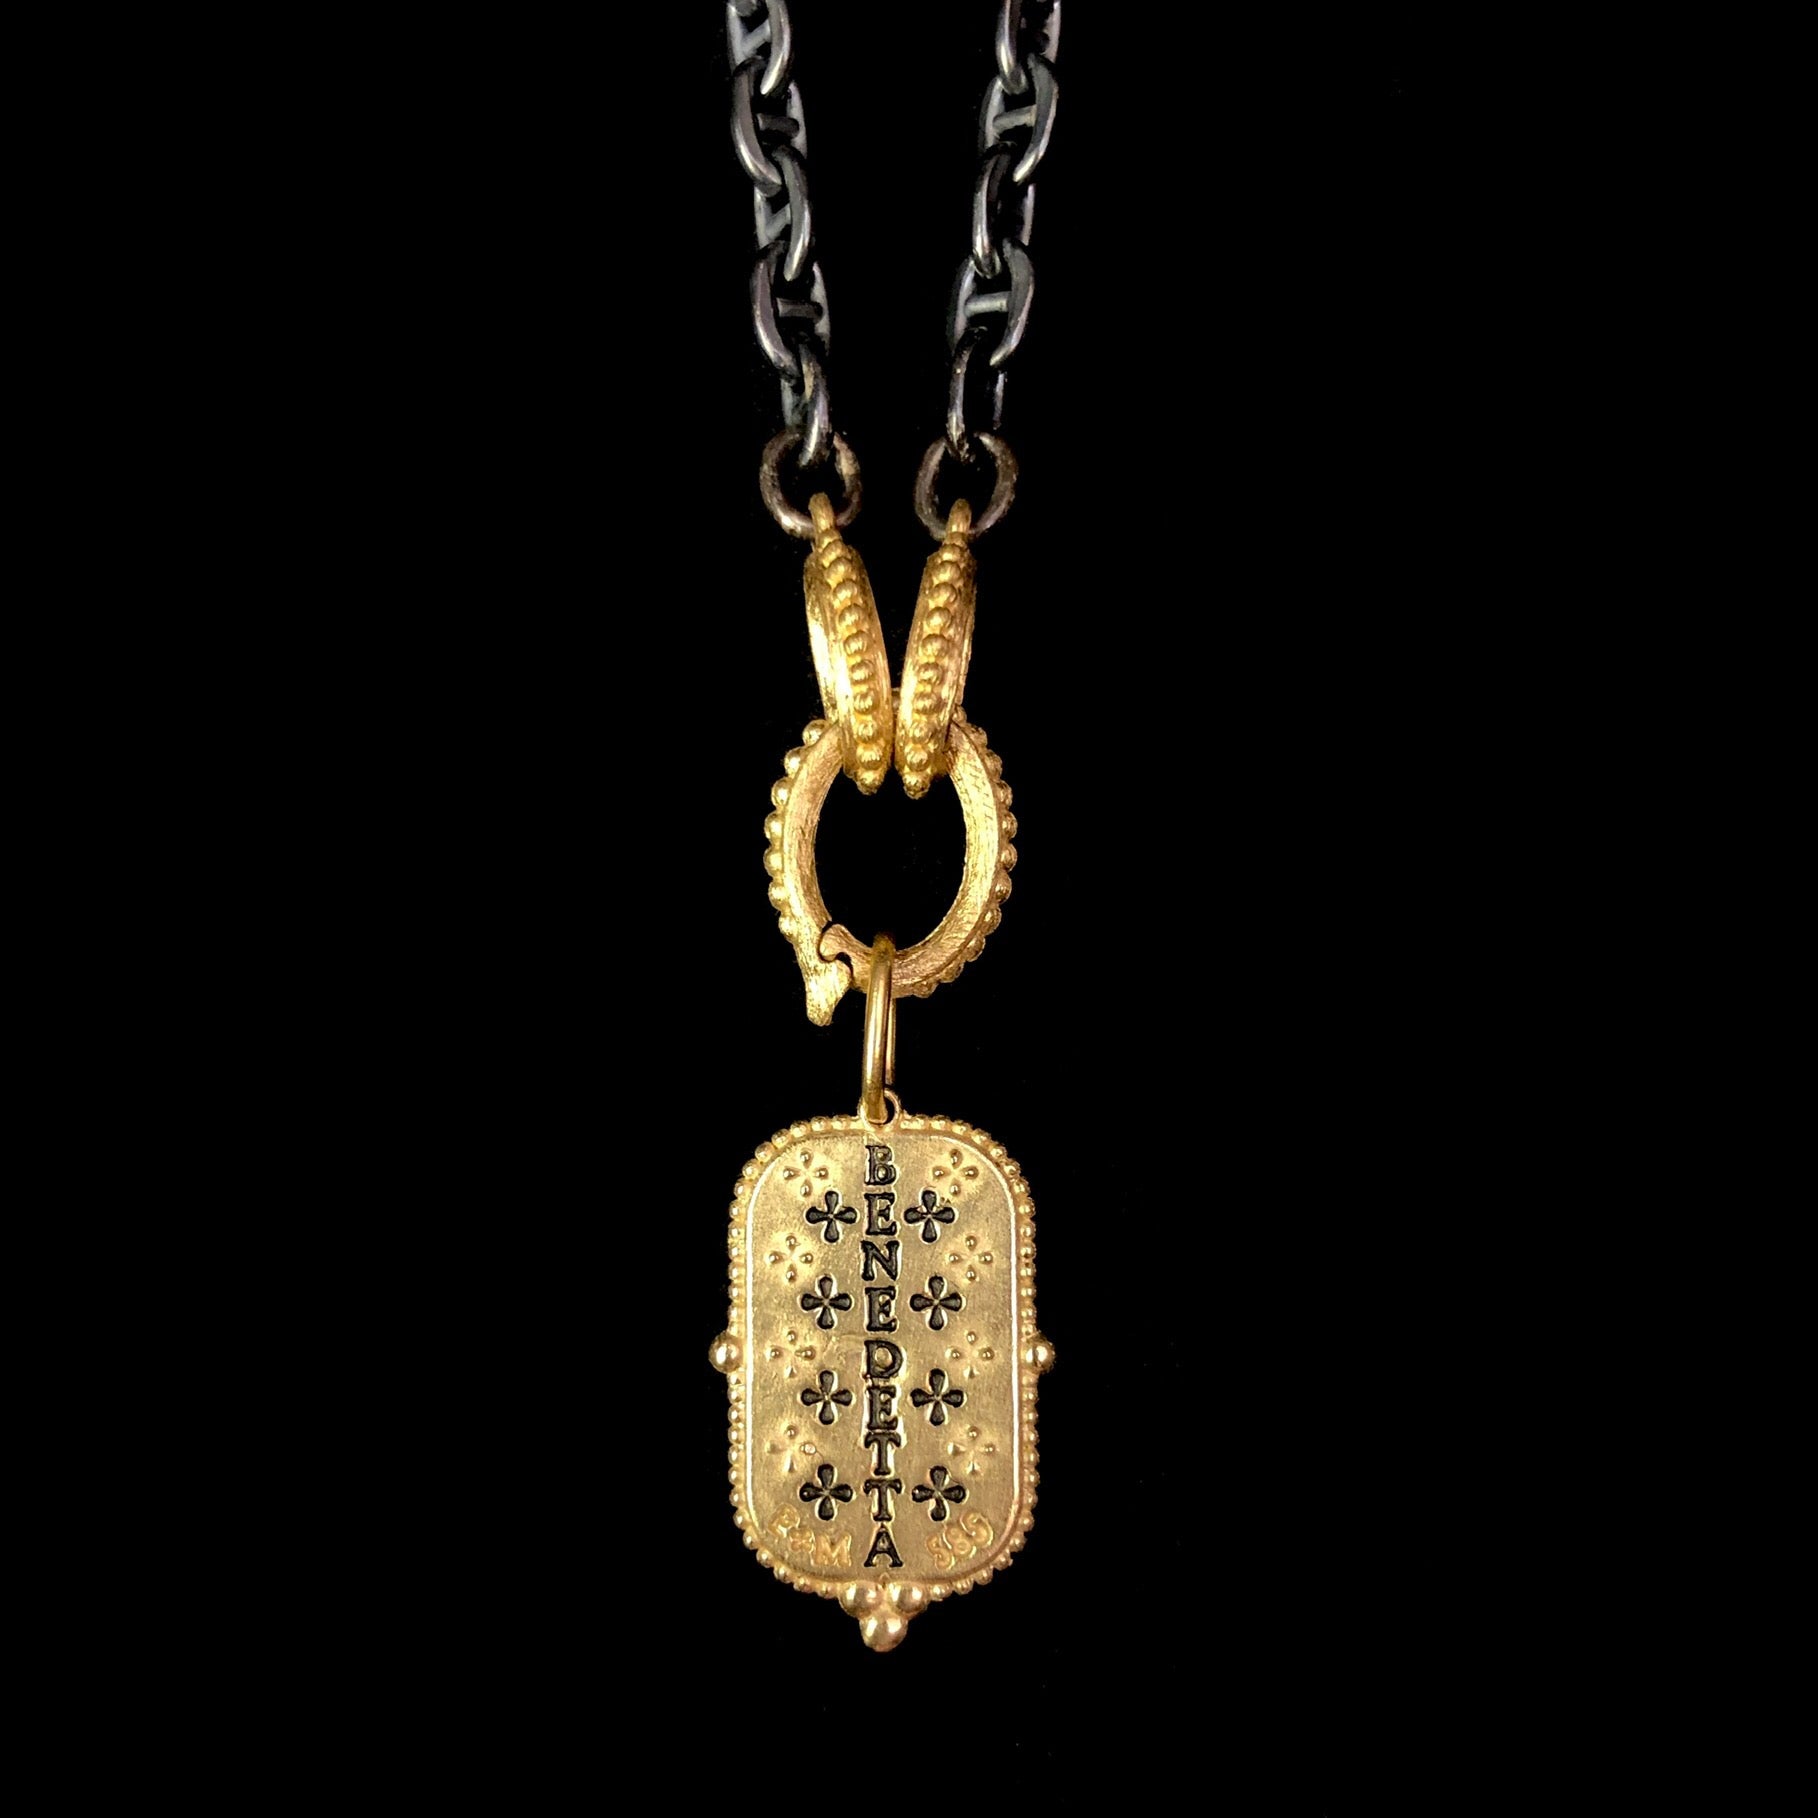 Example of Gold Oval Charm Holder being used to close chain and display charm